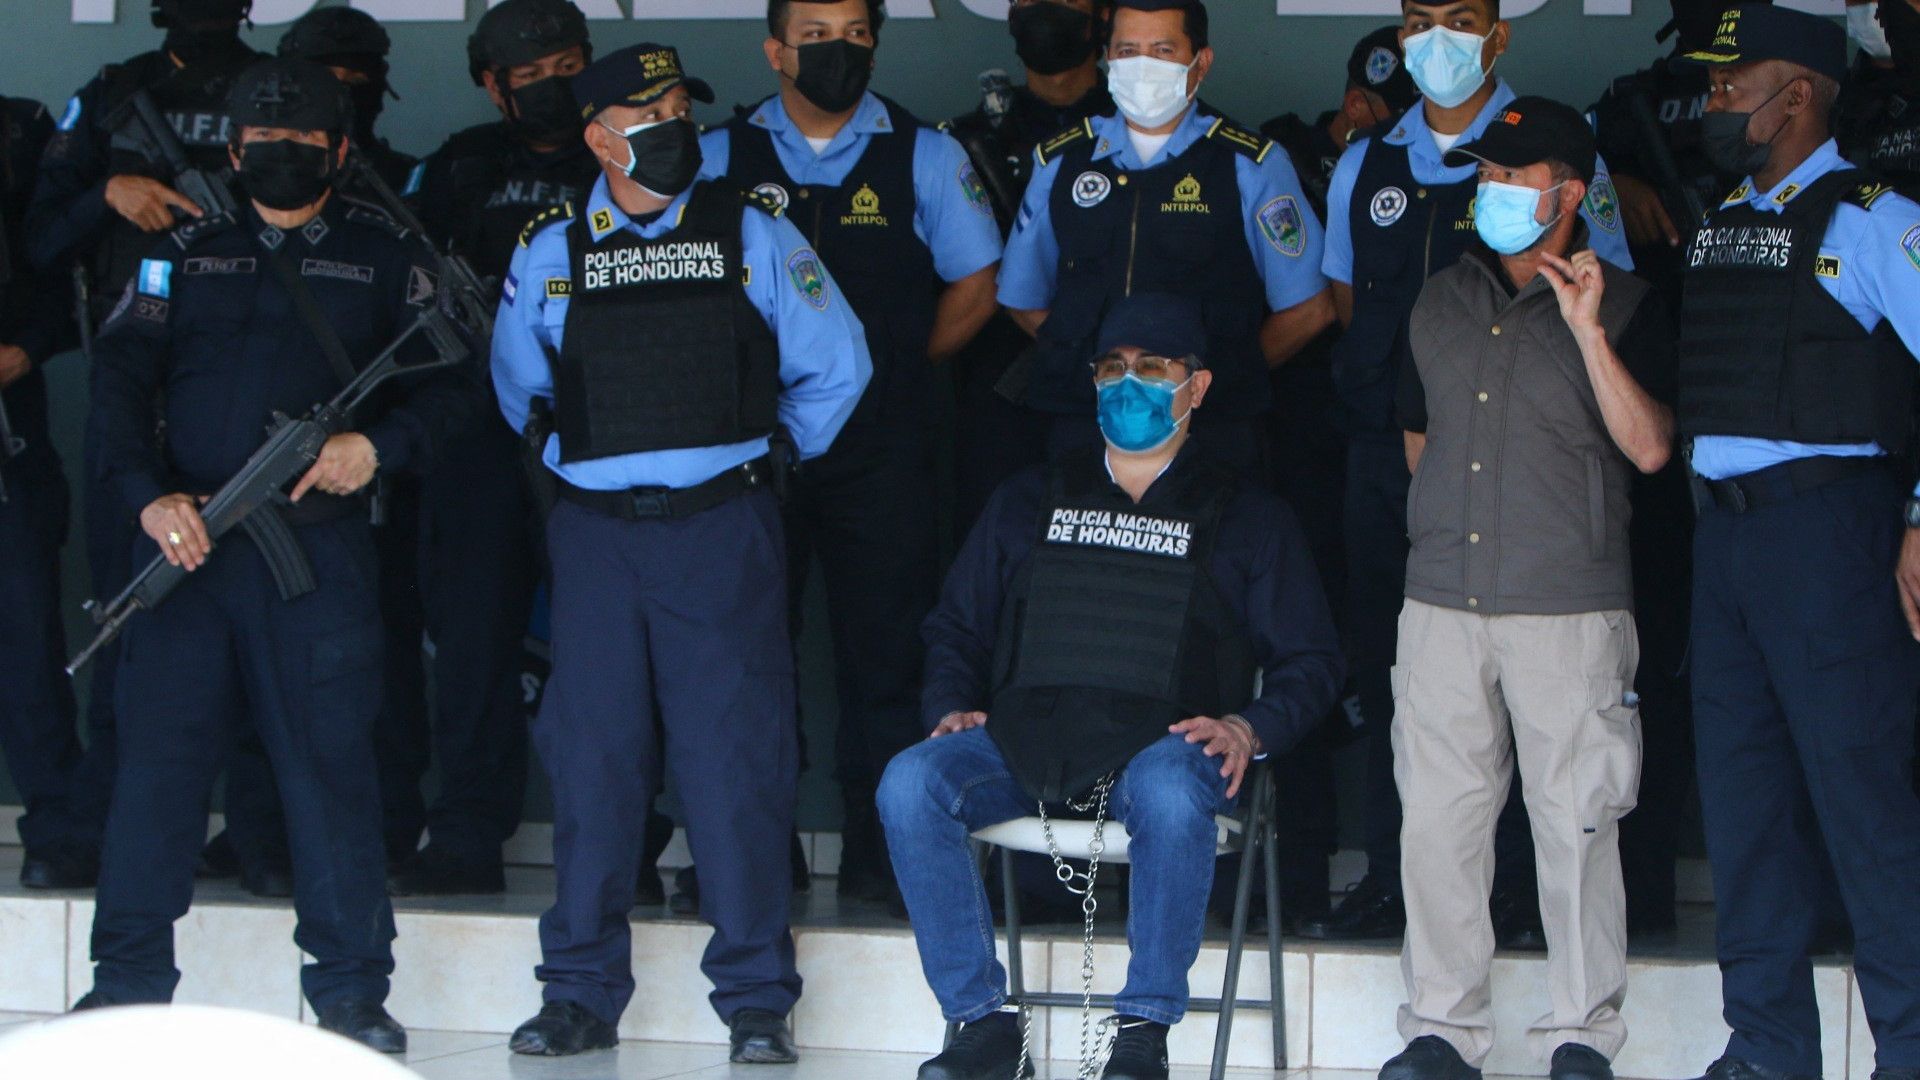 Former Honduran president Juan Orlando Hernandez sits, his ankles cuffed, surrounded by police in bulltproof vests and masks